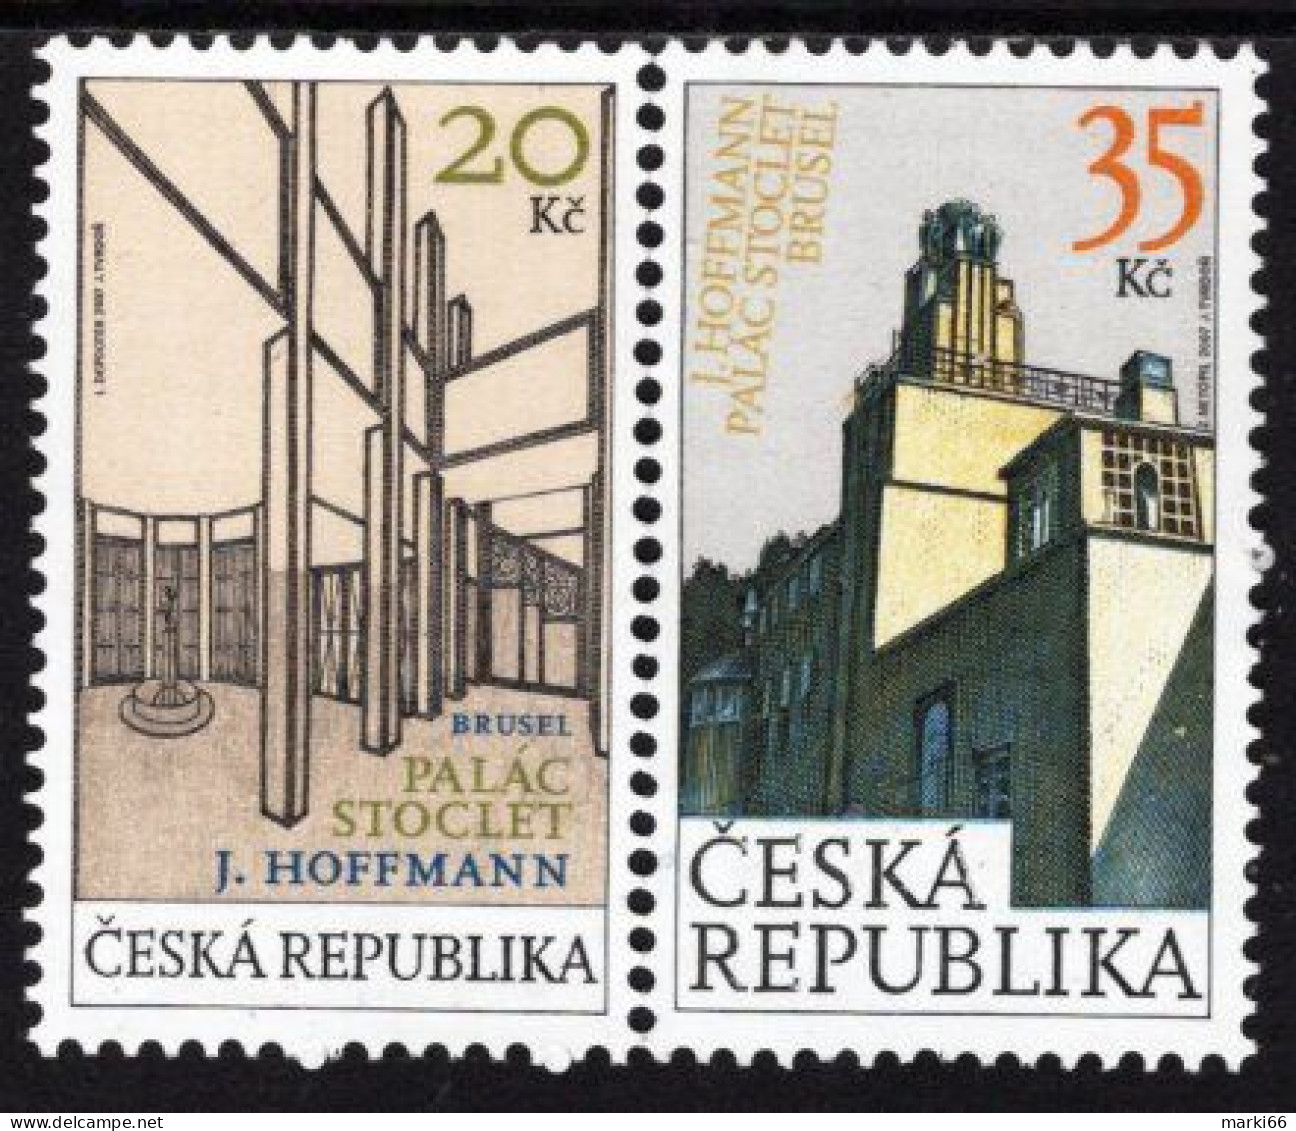 Czech Republic - 2007 - Architecture - Stoclet Palace - Joint Issue With Belgium - Mint Stamp Set - Ongebruikt